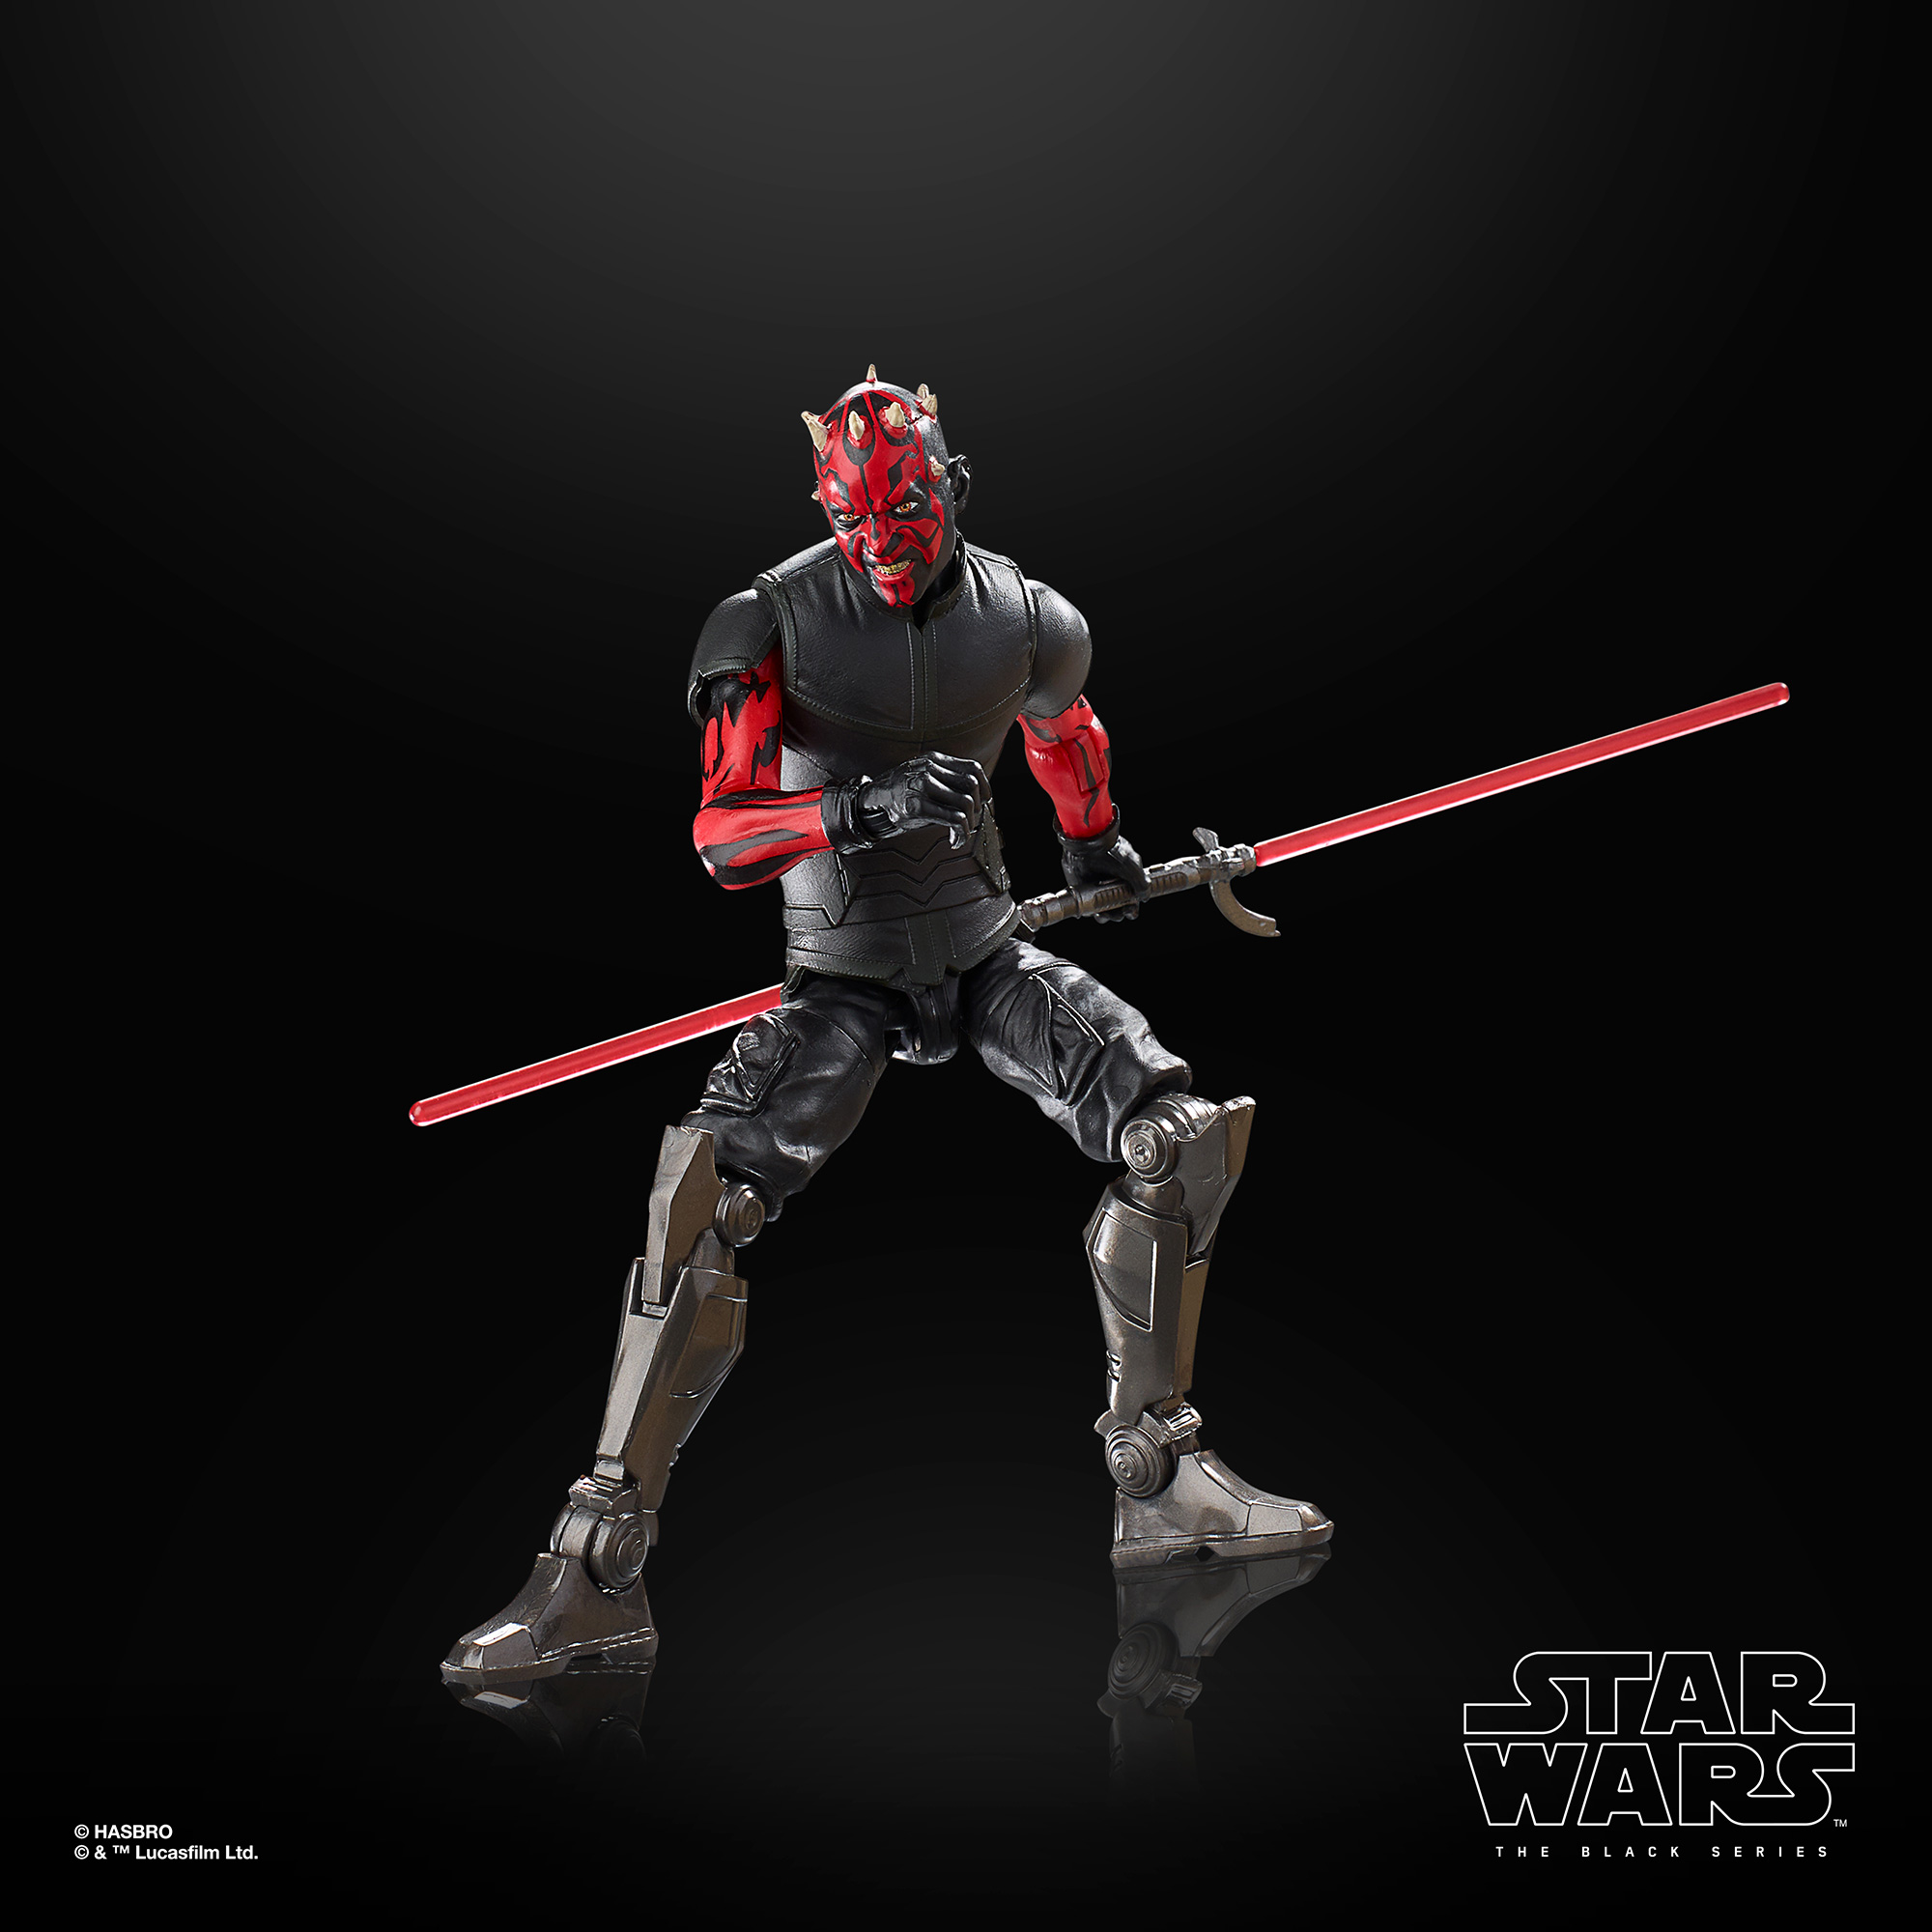 Press Release - Exclusive TBS 6-Inch Darth Maul (Old Master)